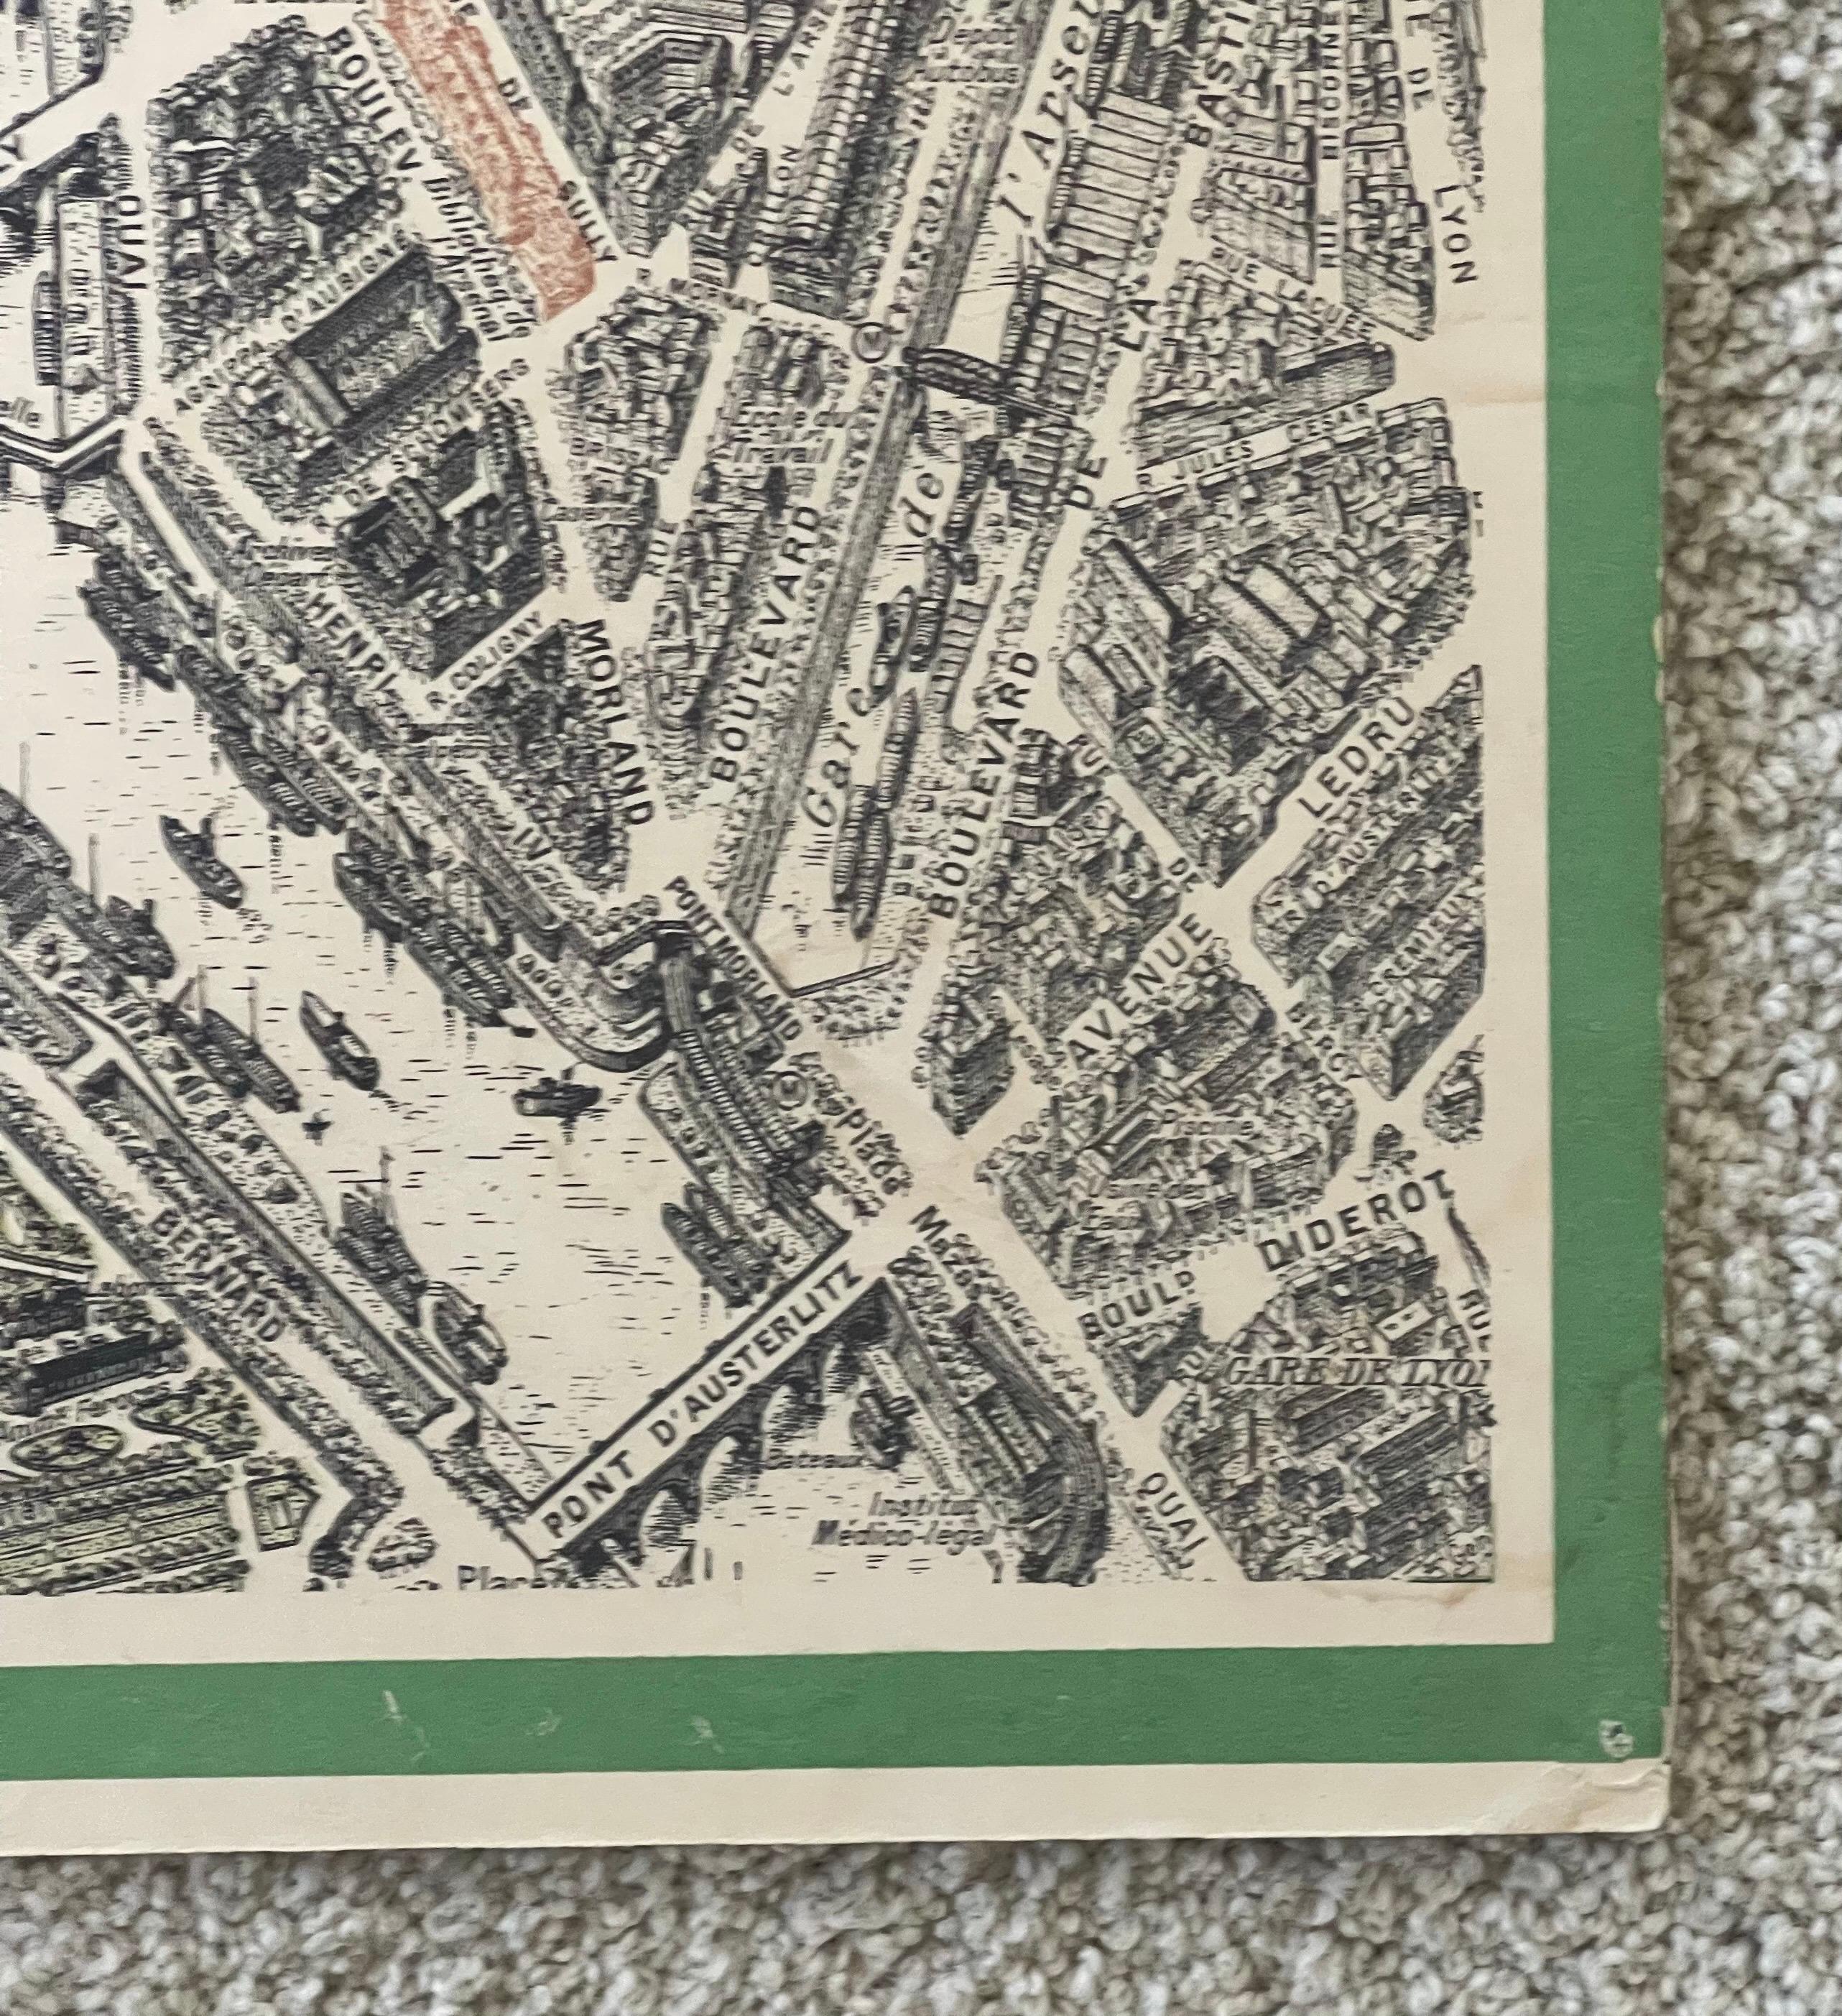 Lithographiekarte „View of the Center of Paris Taken from the Air“ im Angebot 1